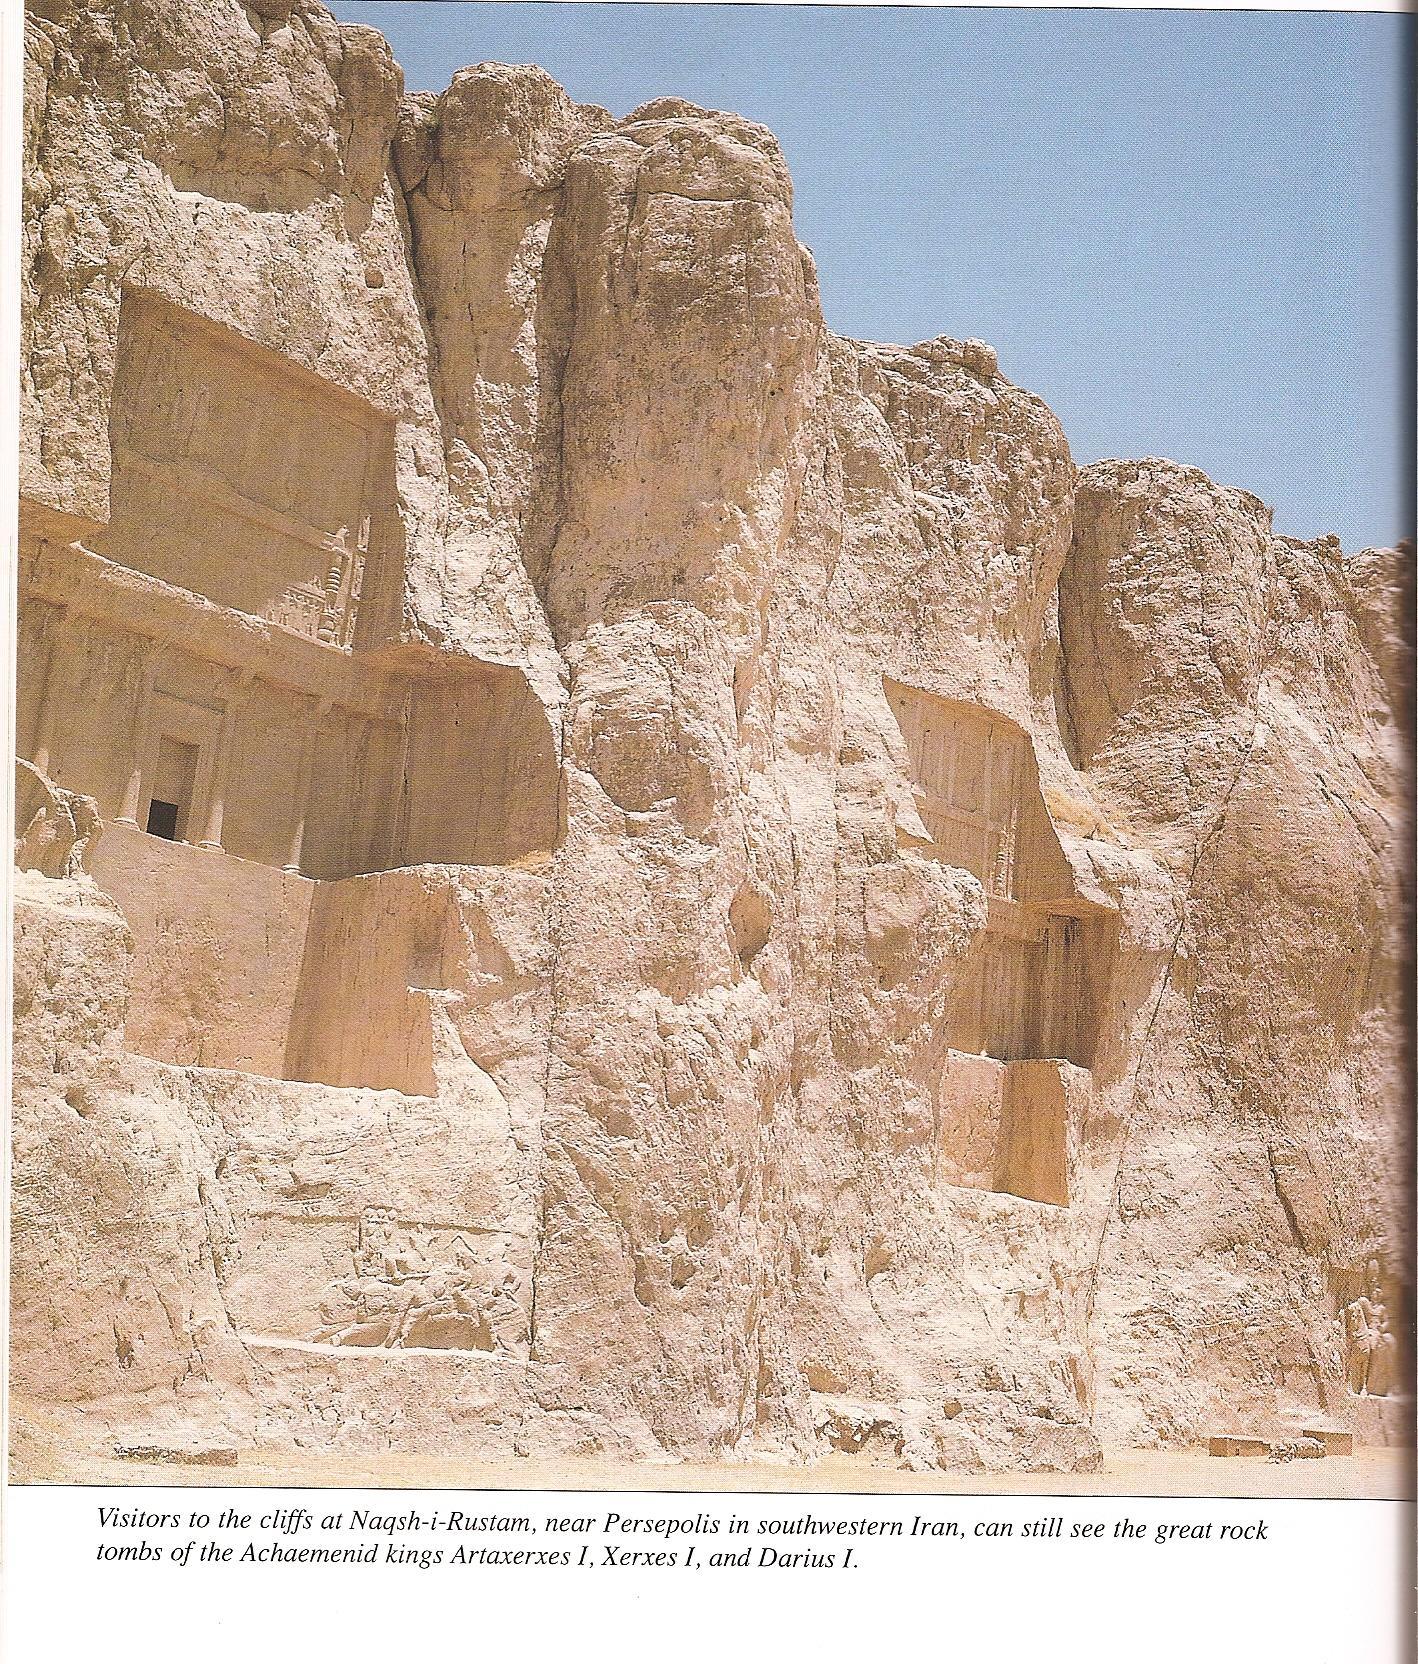 tombs of kings Darius, Xerxes, & Arta-Xerxes, ancient tombs of Persian giant mixed-breed kings in Iran, alien bloodline, mixed-breed kings & others protected by alien giant gods, their offspring were buried in grand style & preserved for history, until Radical Islam destroyed them